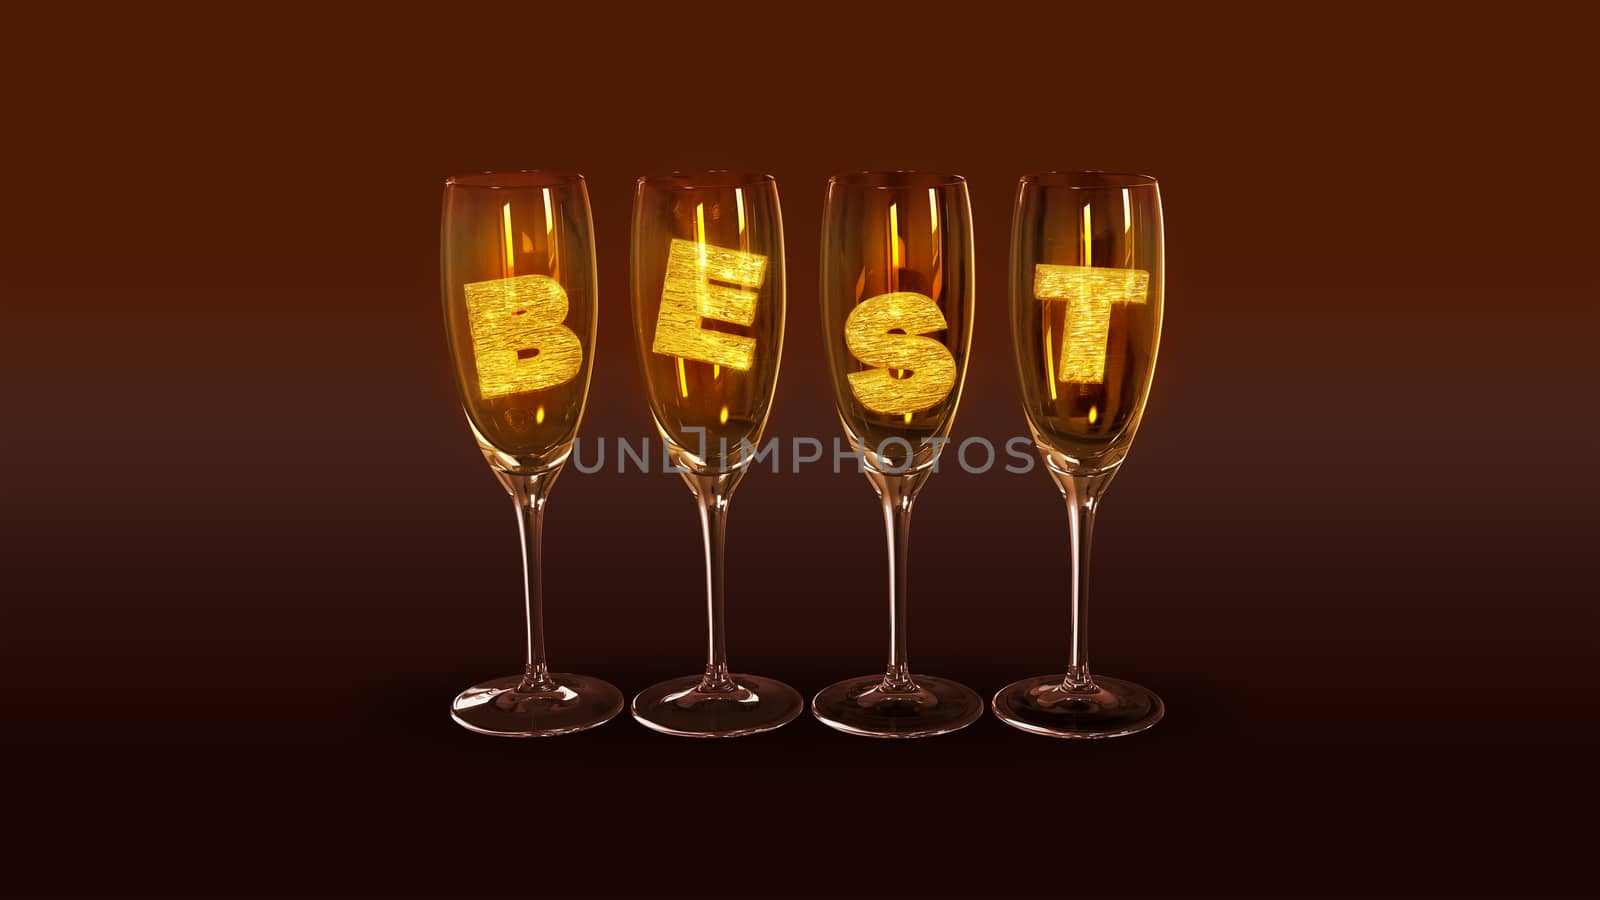 A few glasses with the text "best" by merzavka